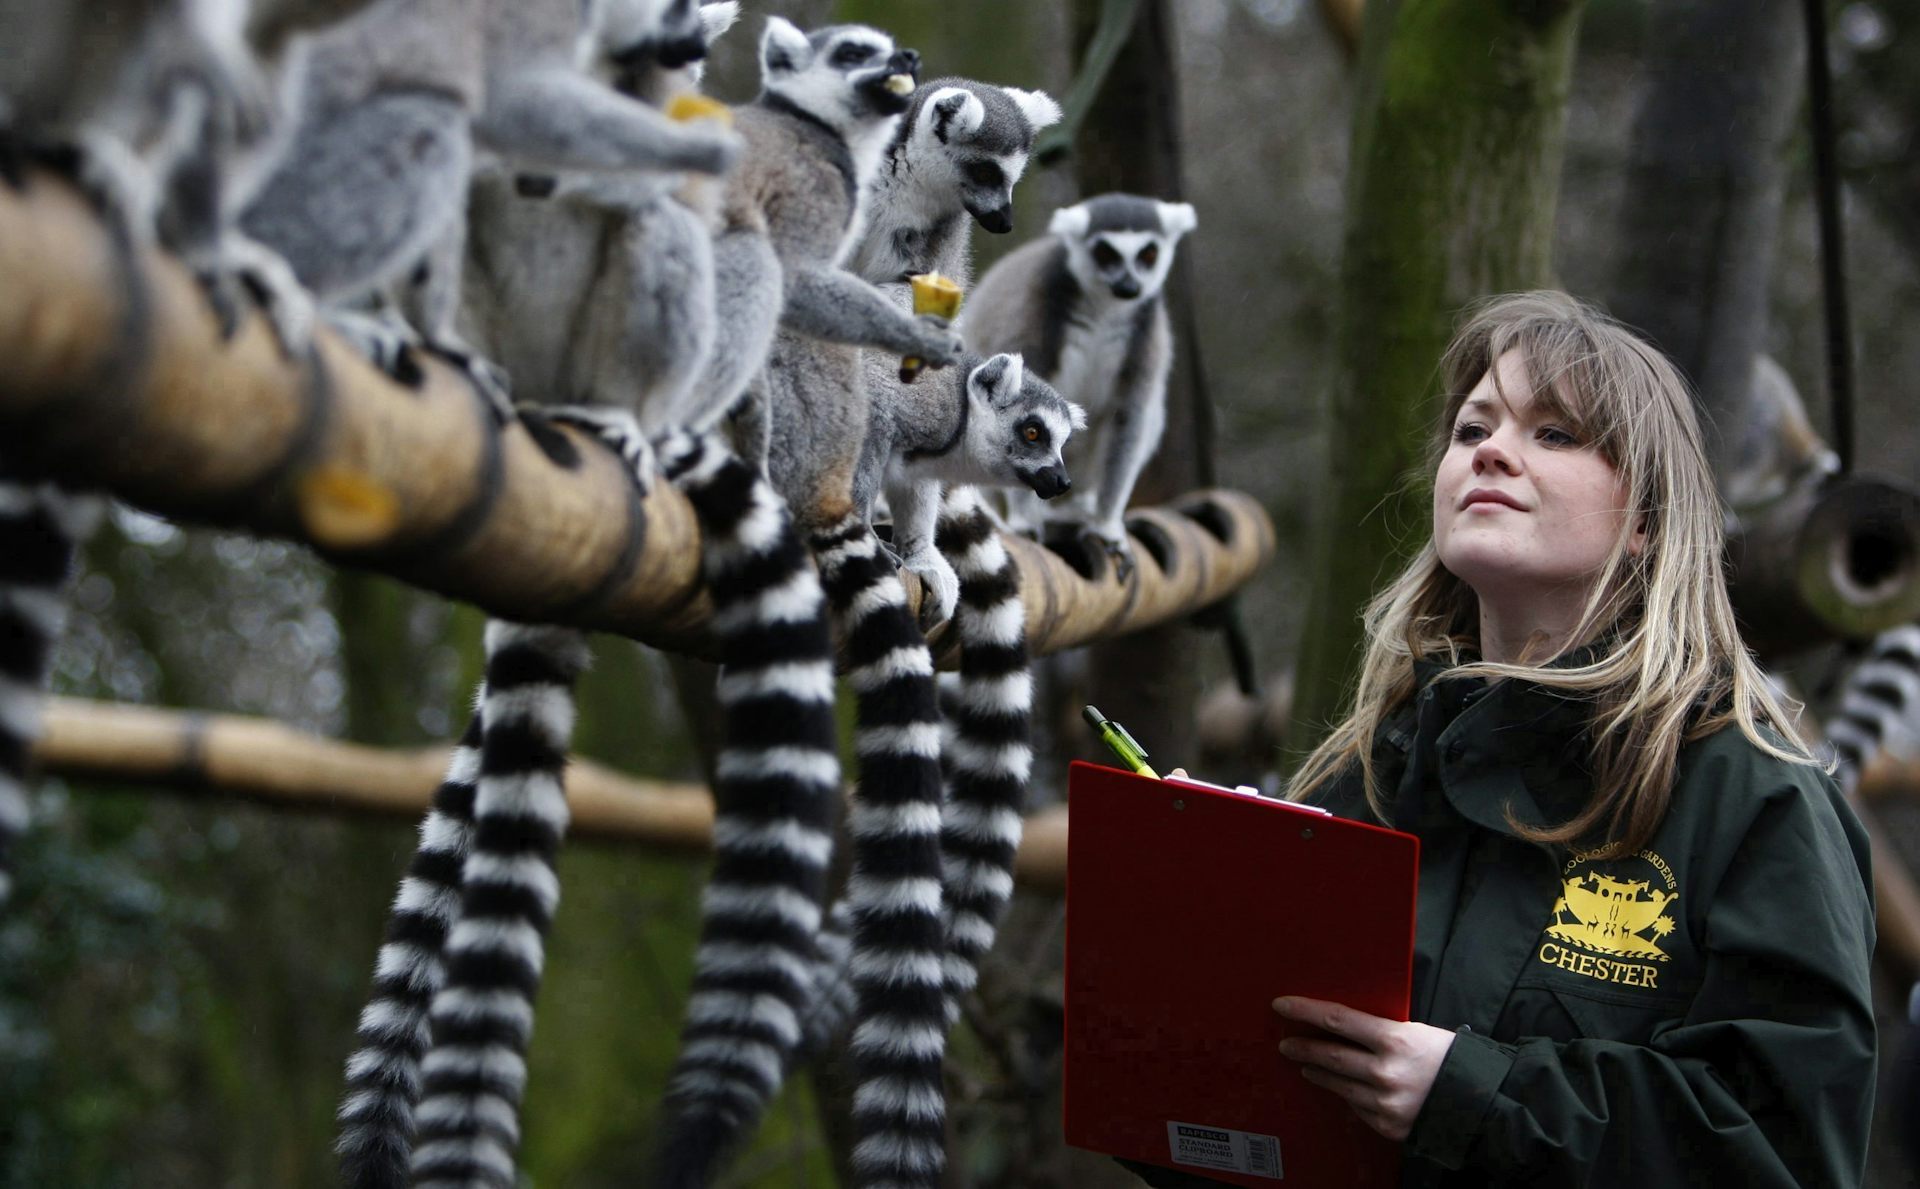 Zoos and universities must work together to safeguard wildlife and